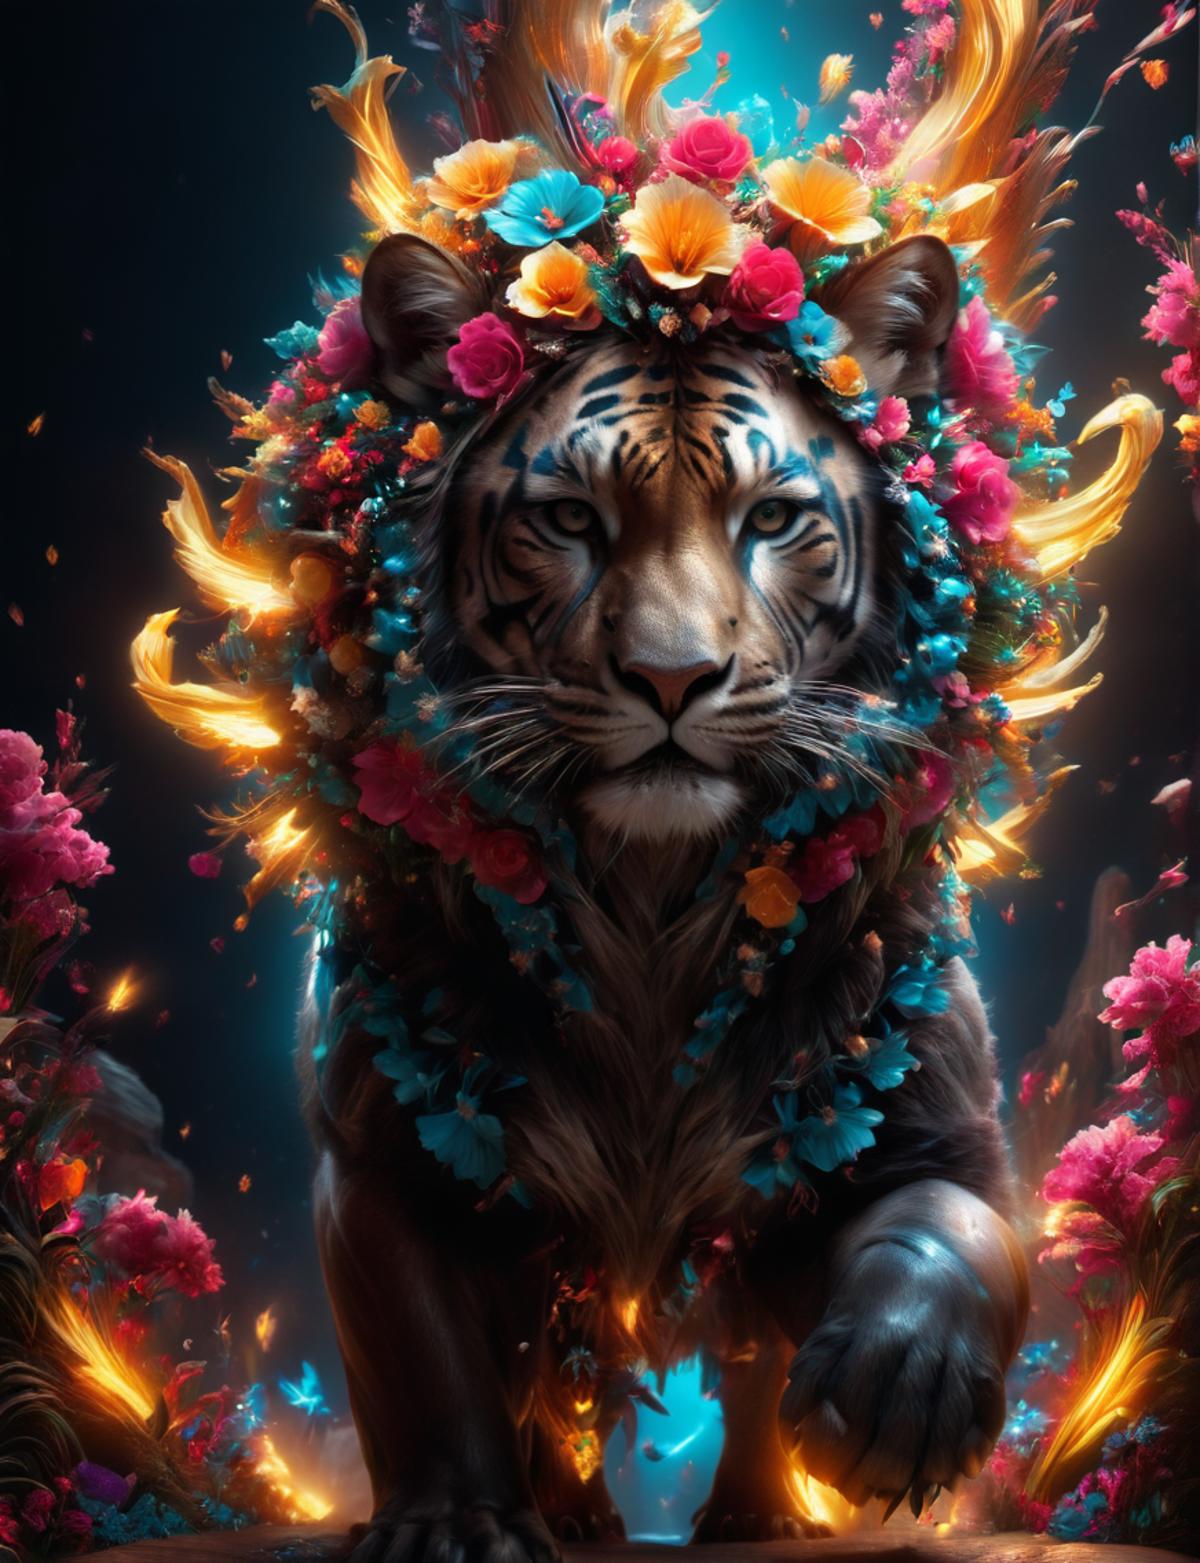 A tiger with a colorful flower crown in a dark background.